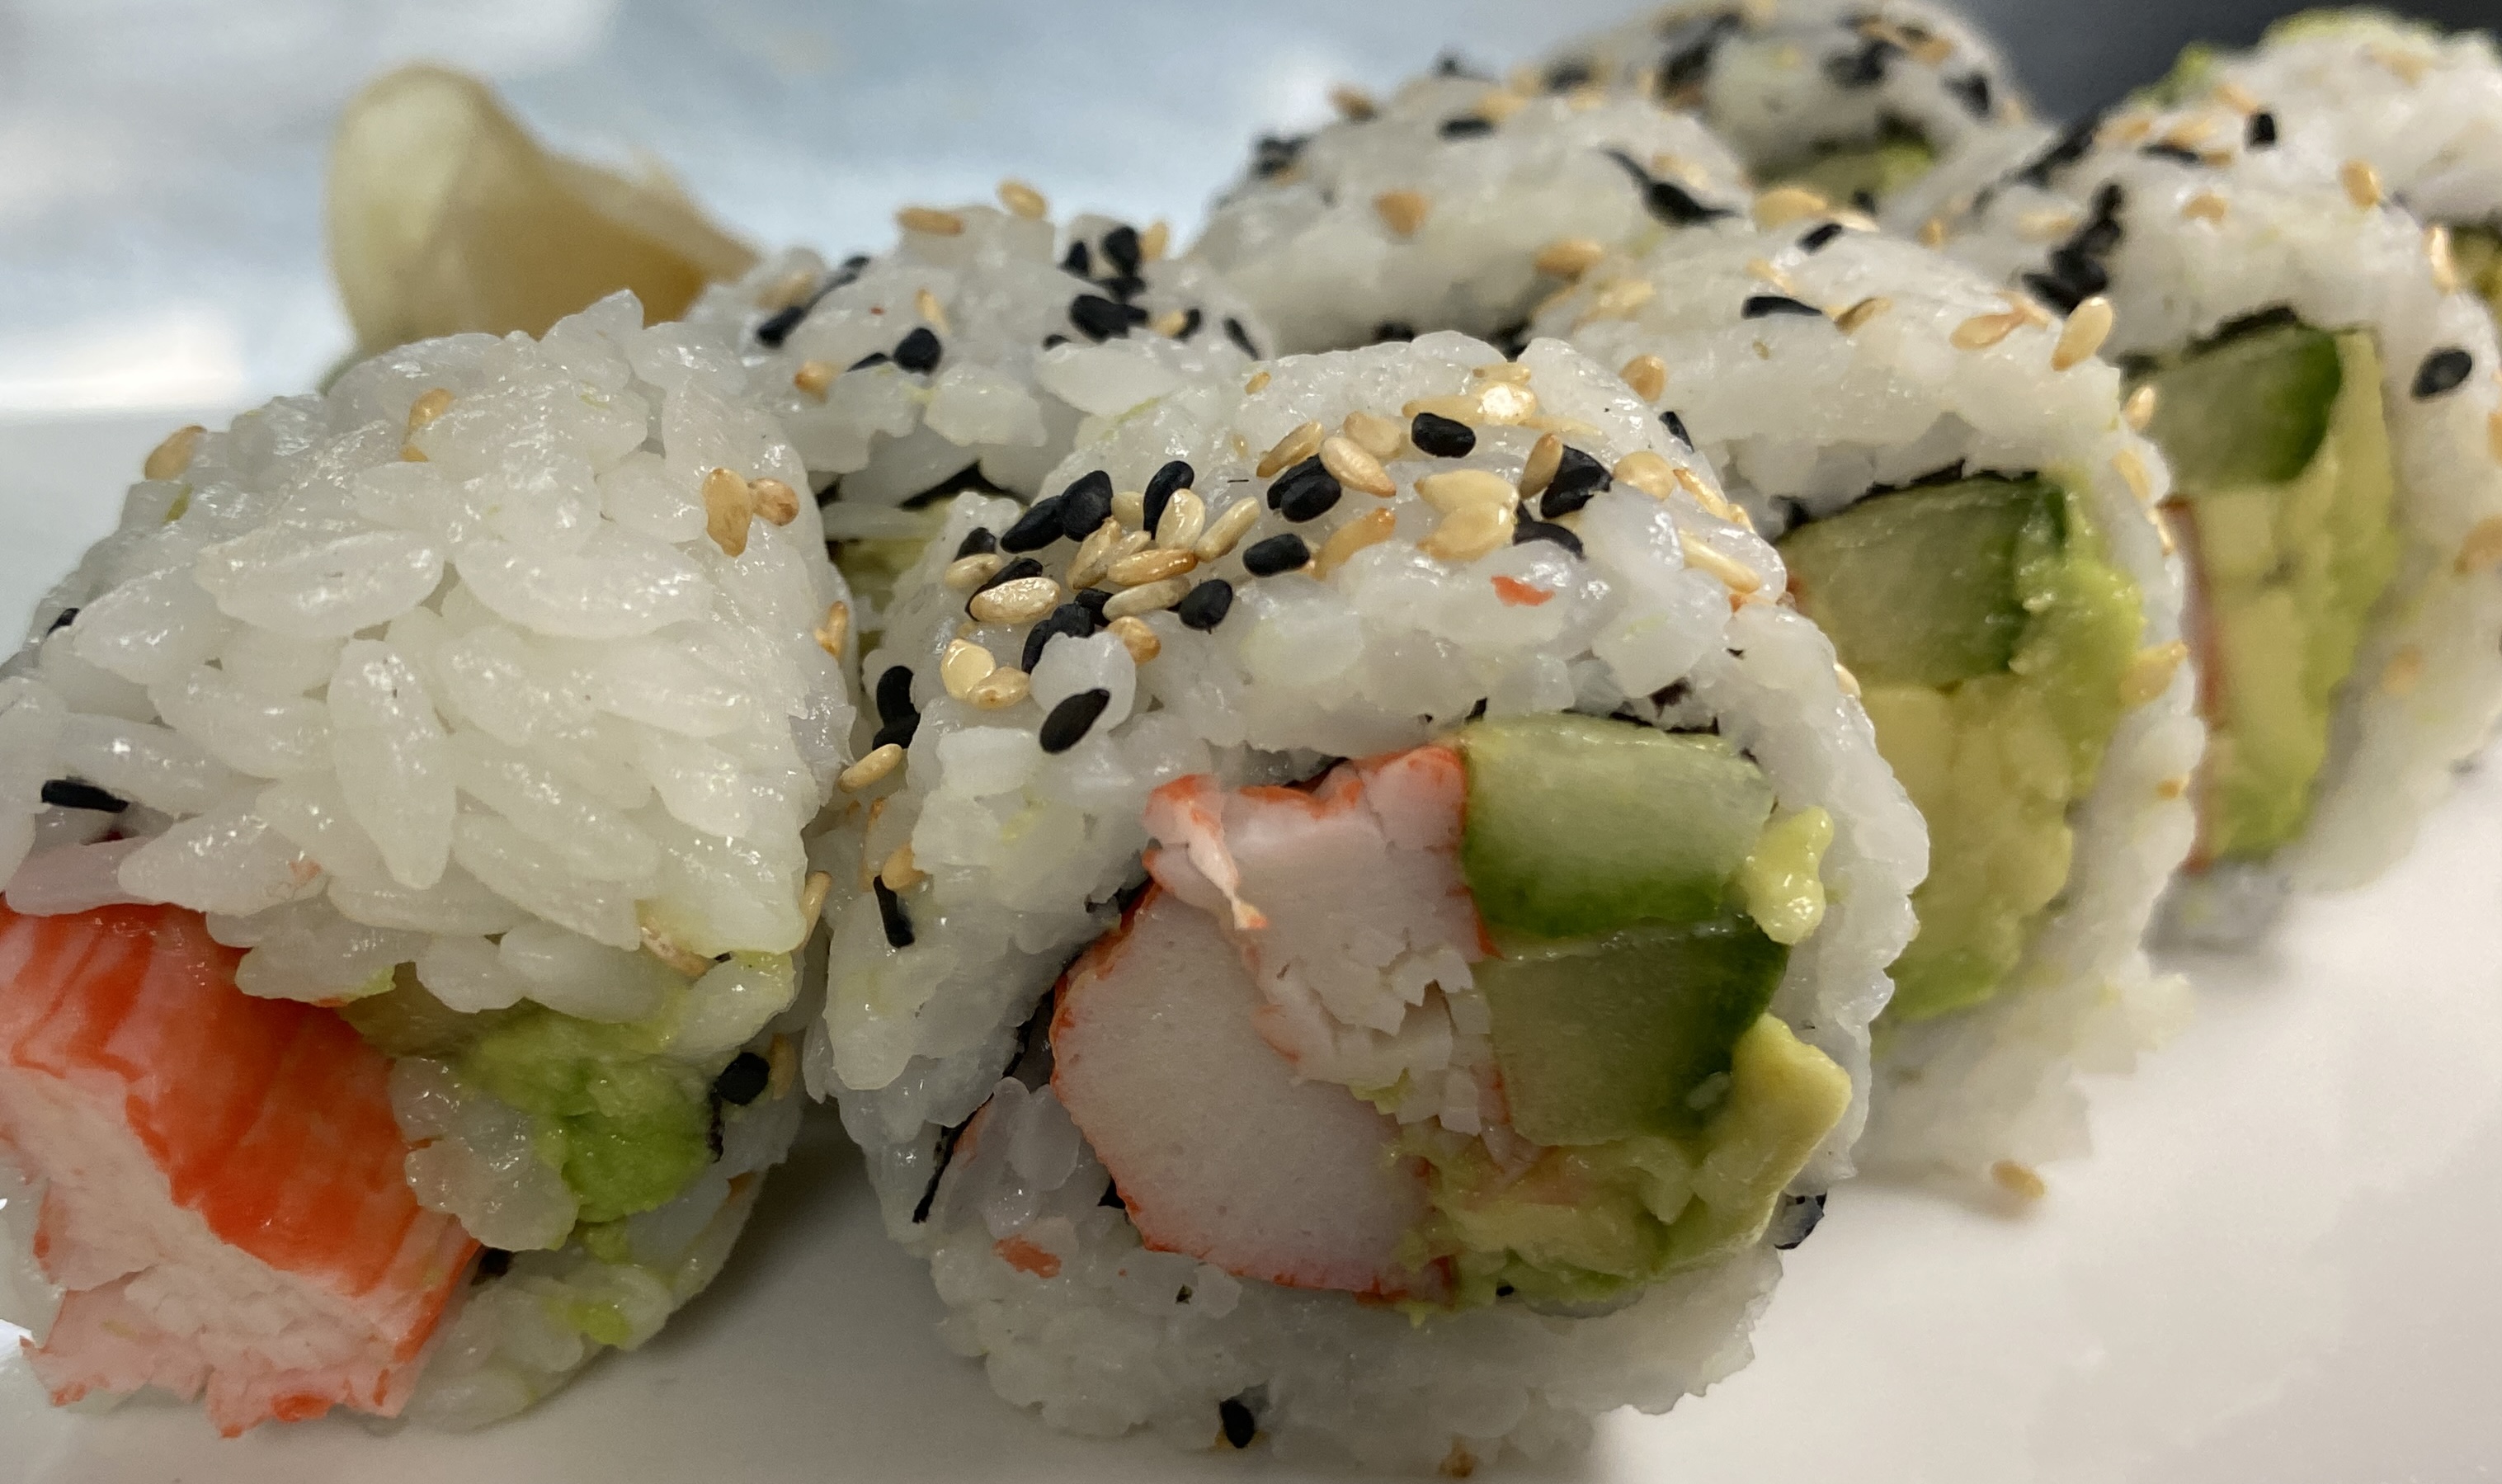 A close up picture of a sushi roll, sliced and displayed on a plate